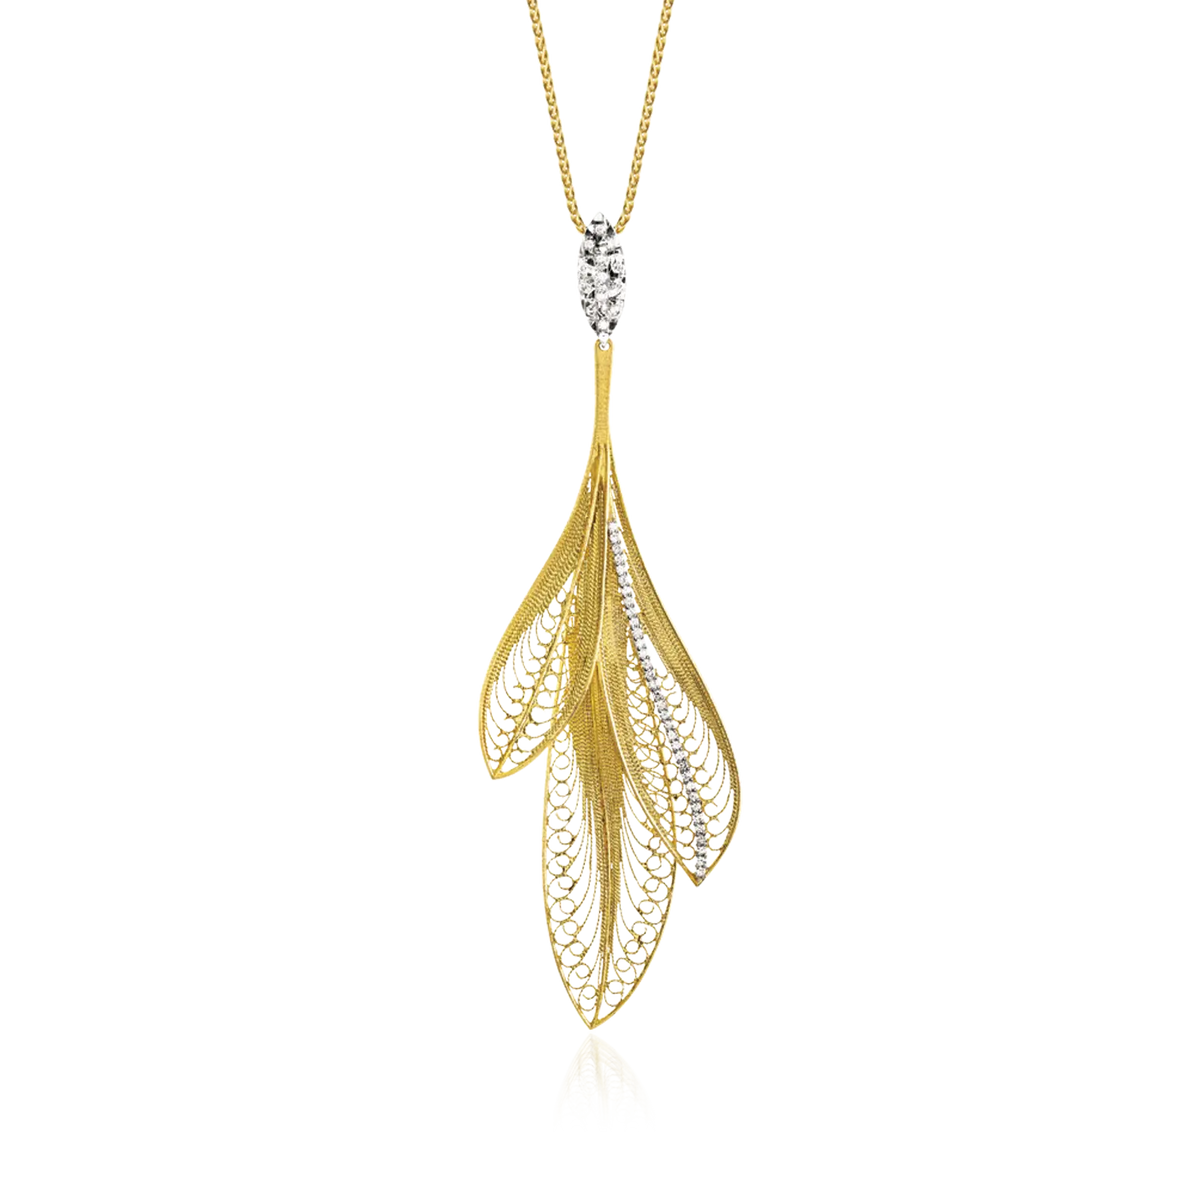 Luz Feather Necklace in 18k yellow and white gold with .25 cttw diamonds.  18k yellow gold diamond feathers 3 pieces pendant necklace  Weight: 0.384 oz  CT Diamond: 0.25 ROUND VS G   Designed by Luisa Rosas and made in Portugal